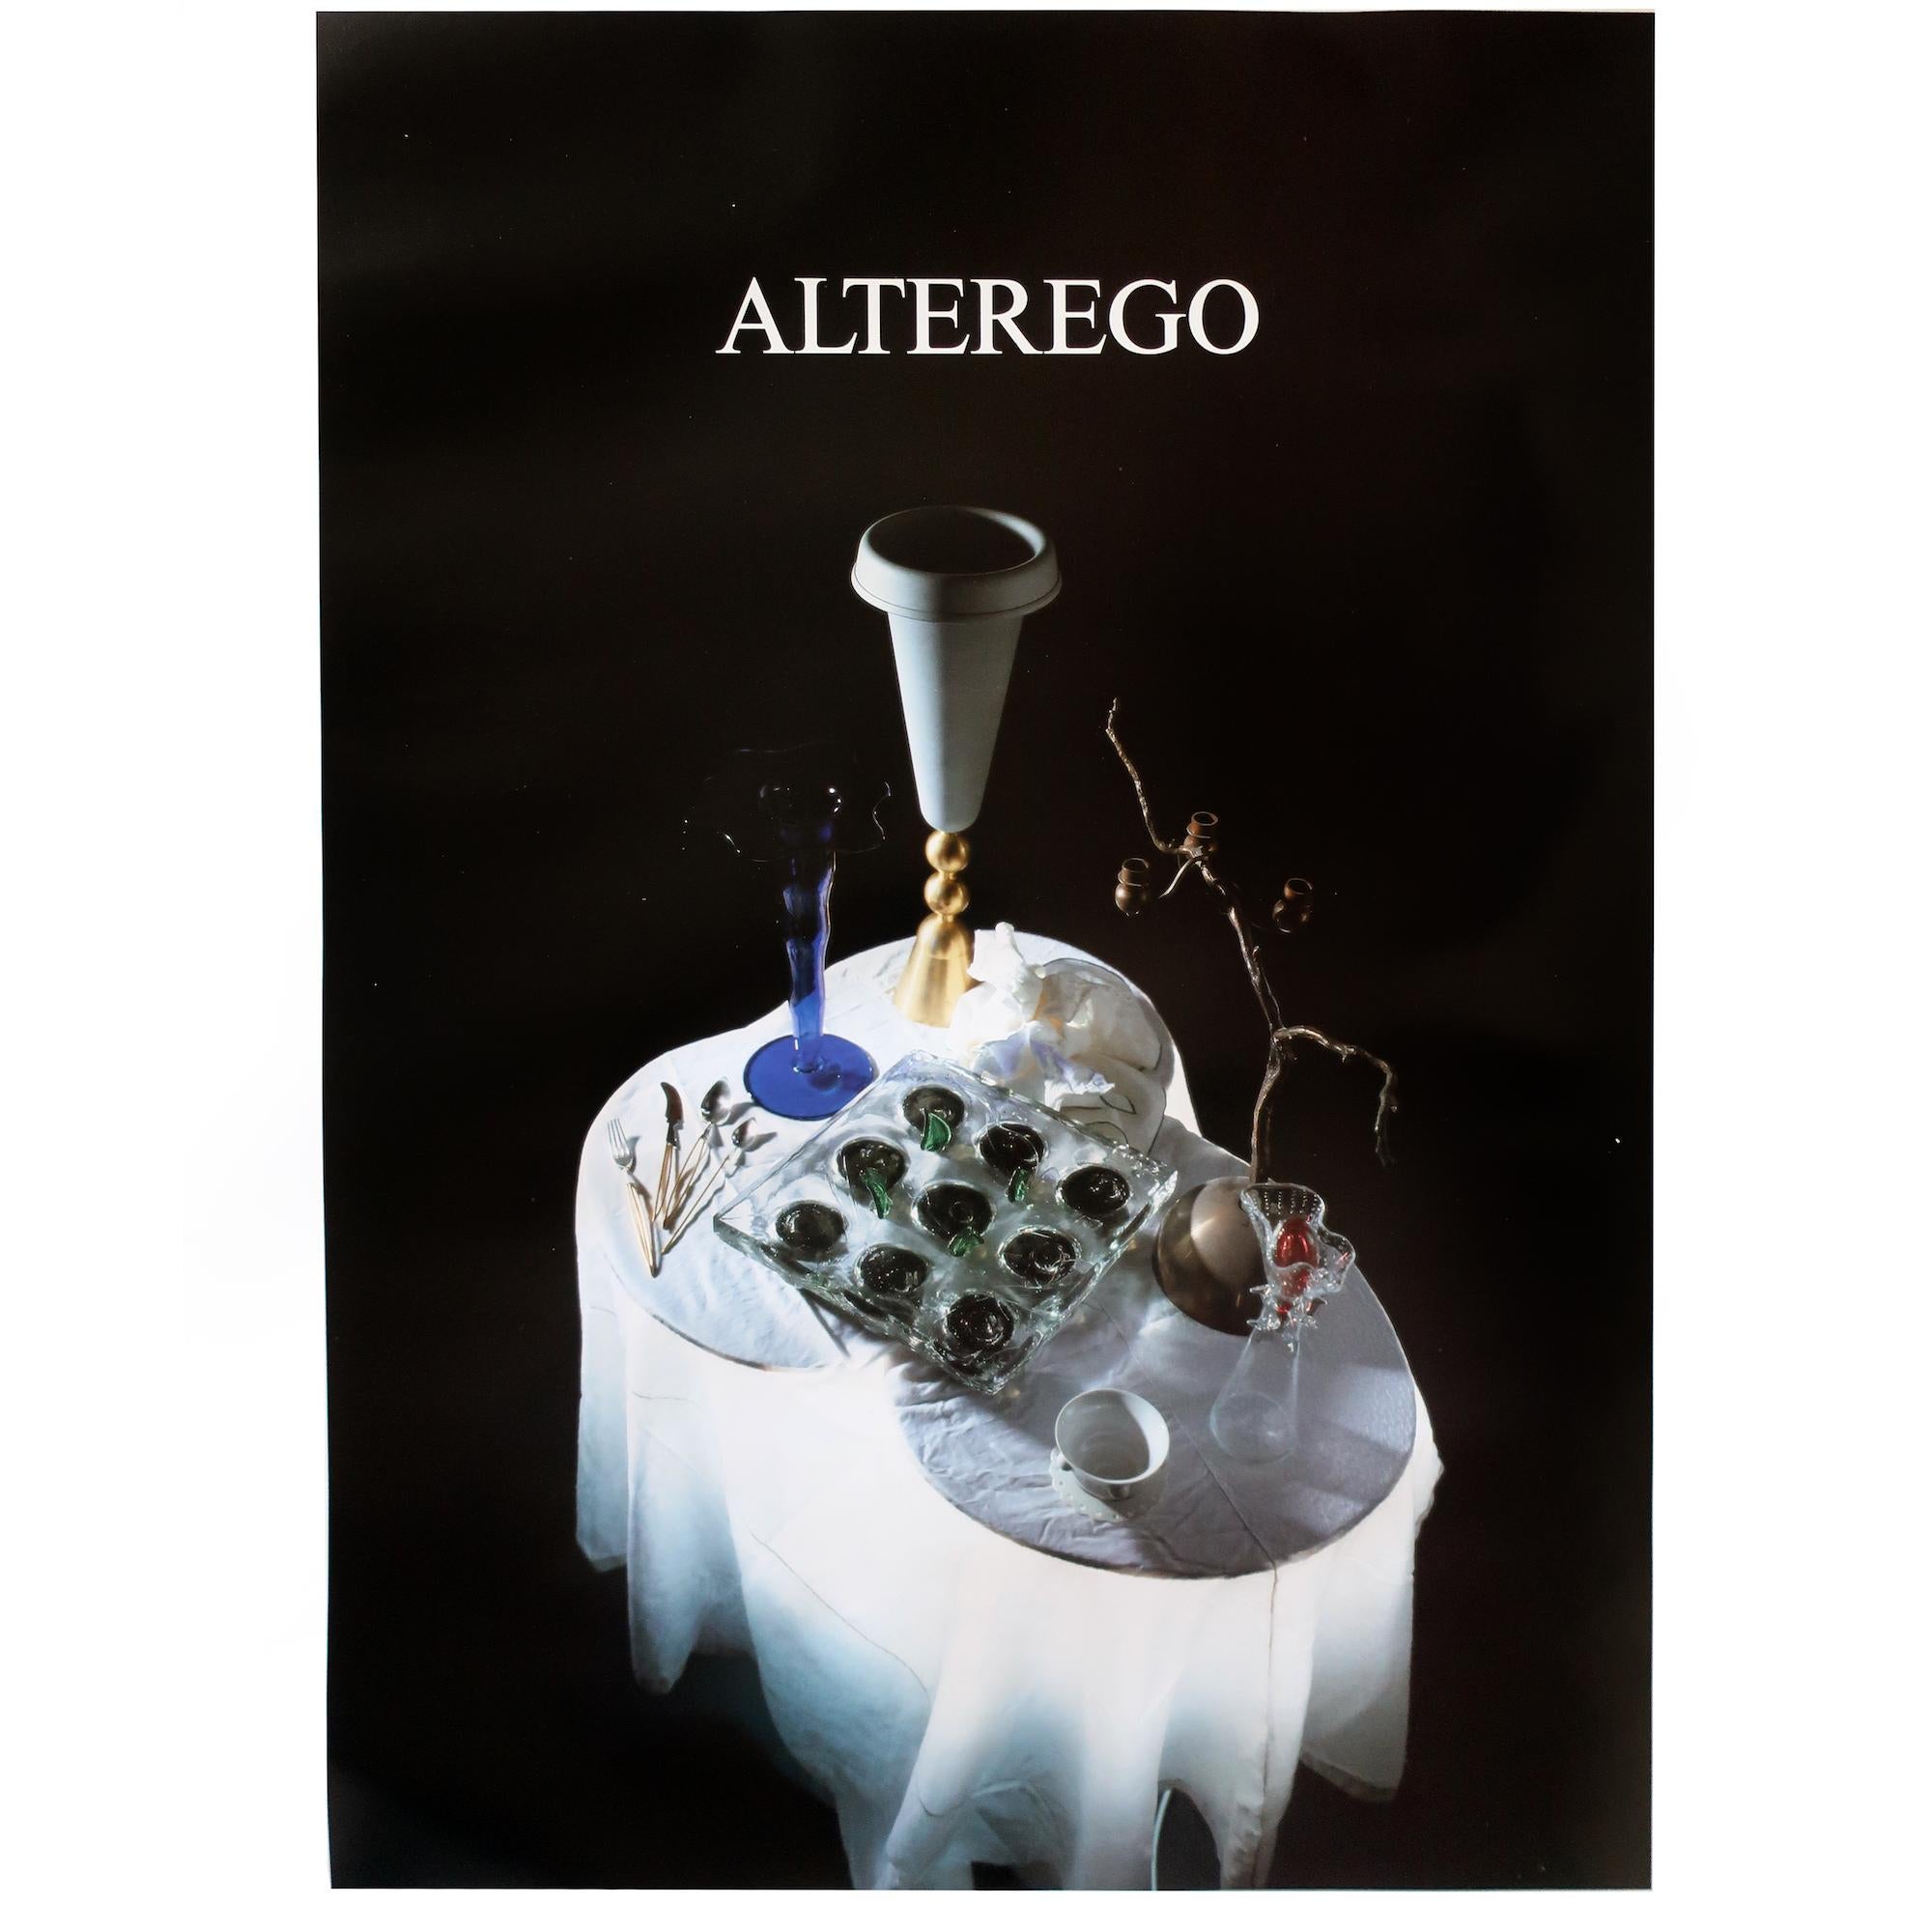 A promotional poster for Czech architect and designer Borek Sipek's work with his design studio Alterego producing works in glass in the 1980s and 1990s. Features a number of Sipek designed pieces on a white table cloth covered table.